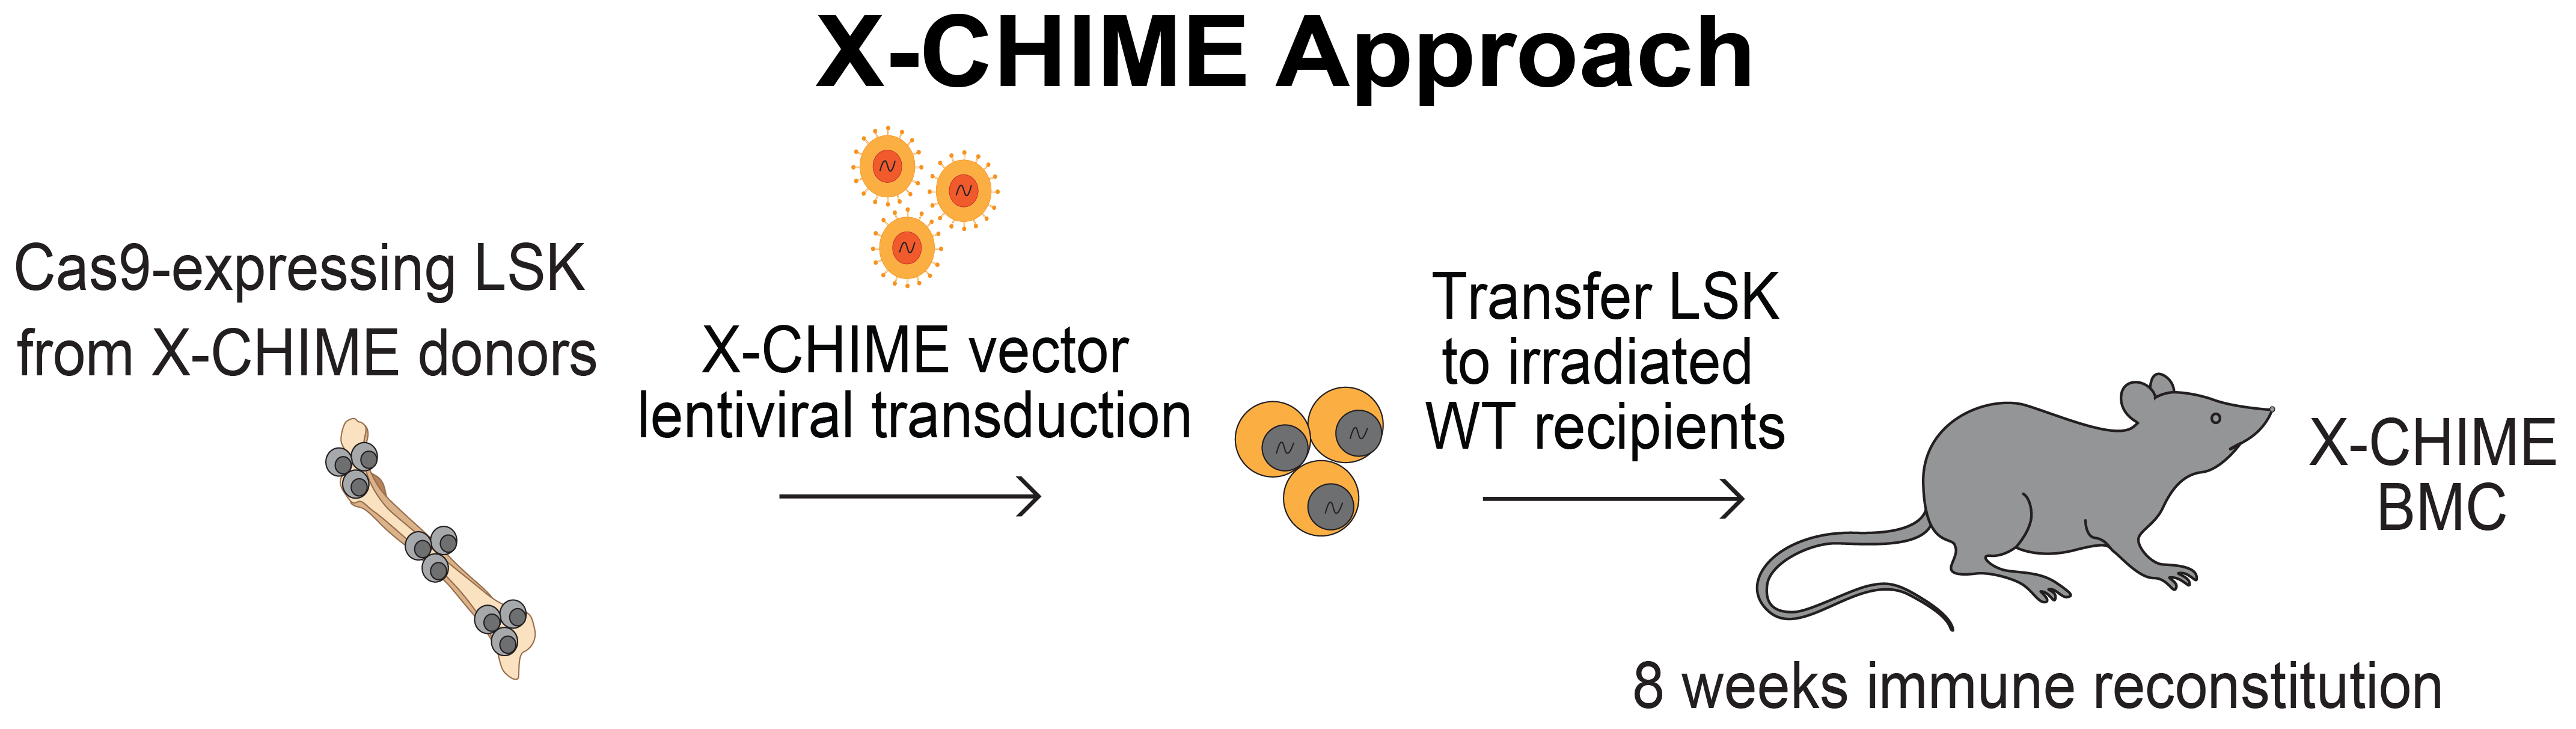 Schematic showing the X-CHIME approach. Cas9-expression LSK from X-CHIME donors leads to X-CHIME vector lentiviral transduction, then transfer LSK to irradiated WT recipients, then 8 weeks immune reconstitution in a mouse leads to X-CHIME BMC.